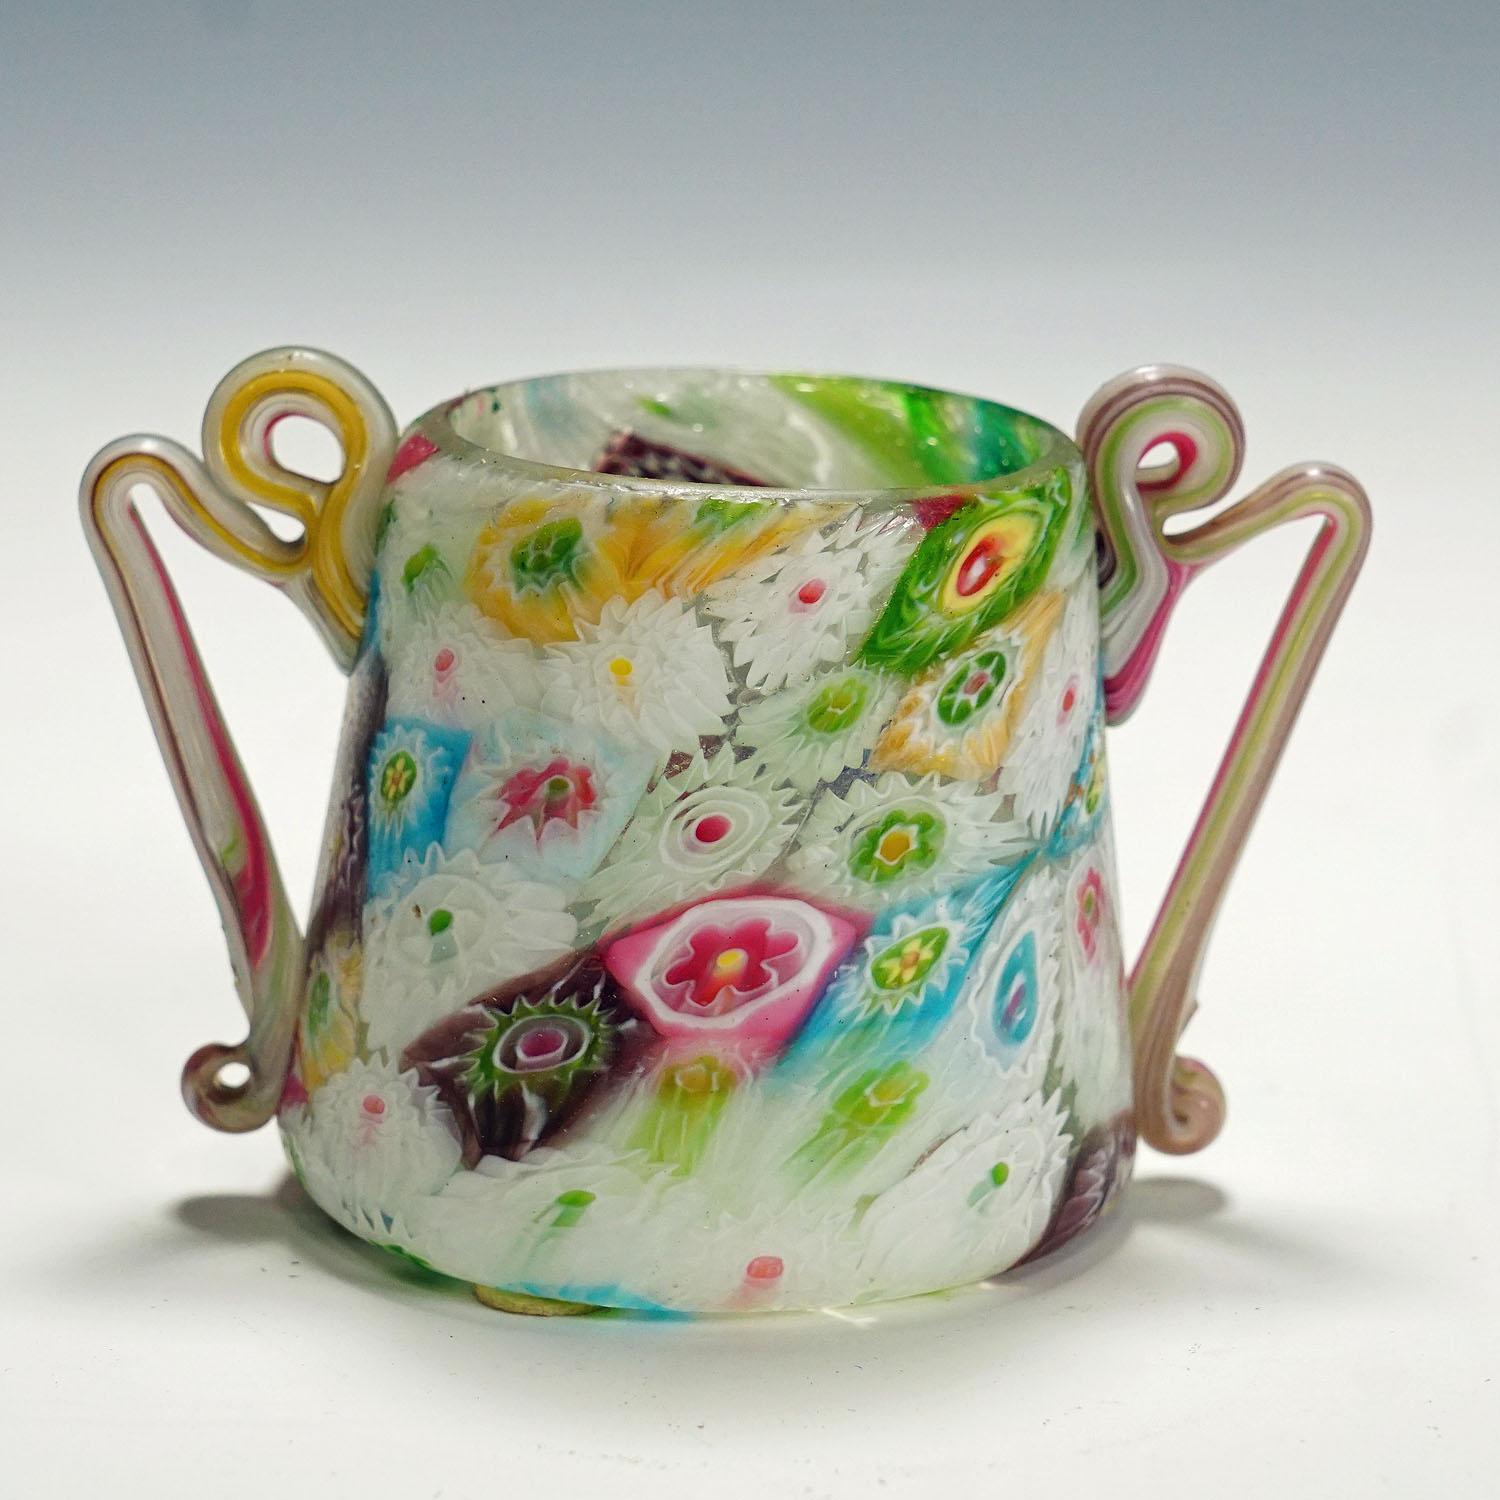 Italian Antique Millefiori Goblet with Handles by Fratelli Toso, Murano circa 1910